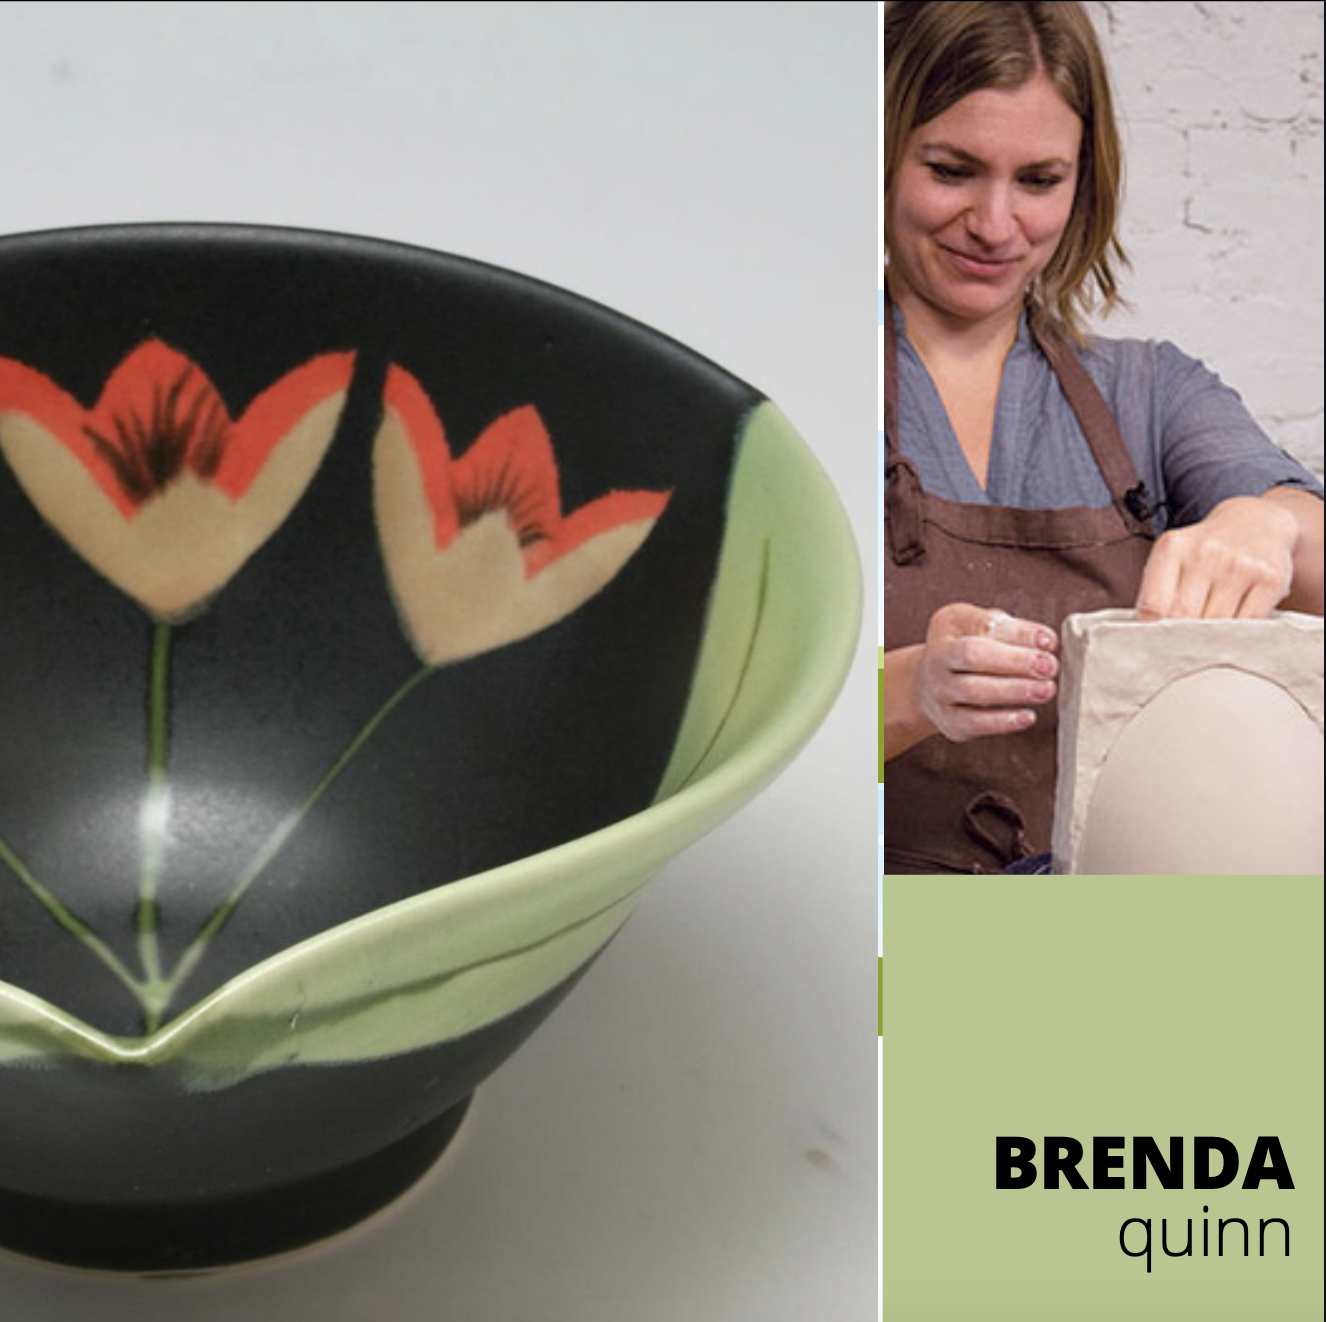 GLAZING A THROWN AND ALTERED BOWL WITH BRENDA QUINN